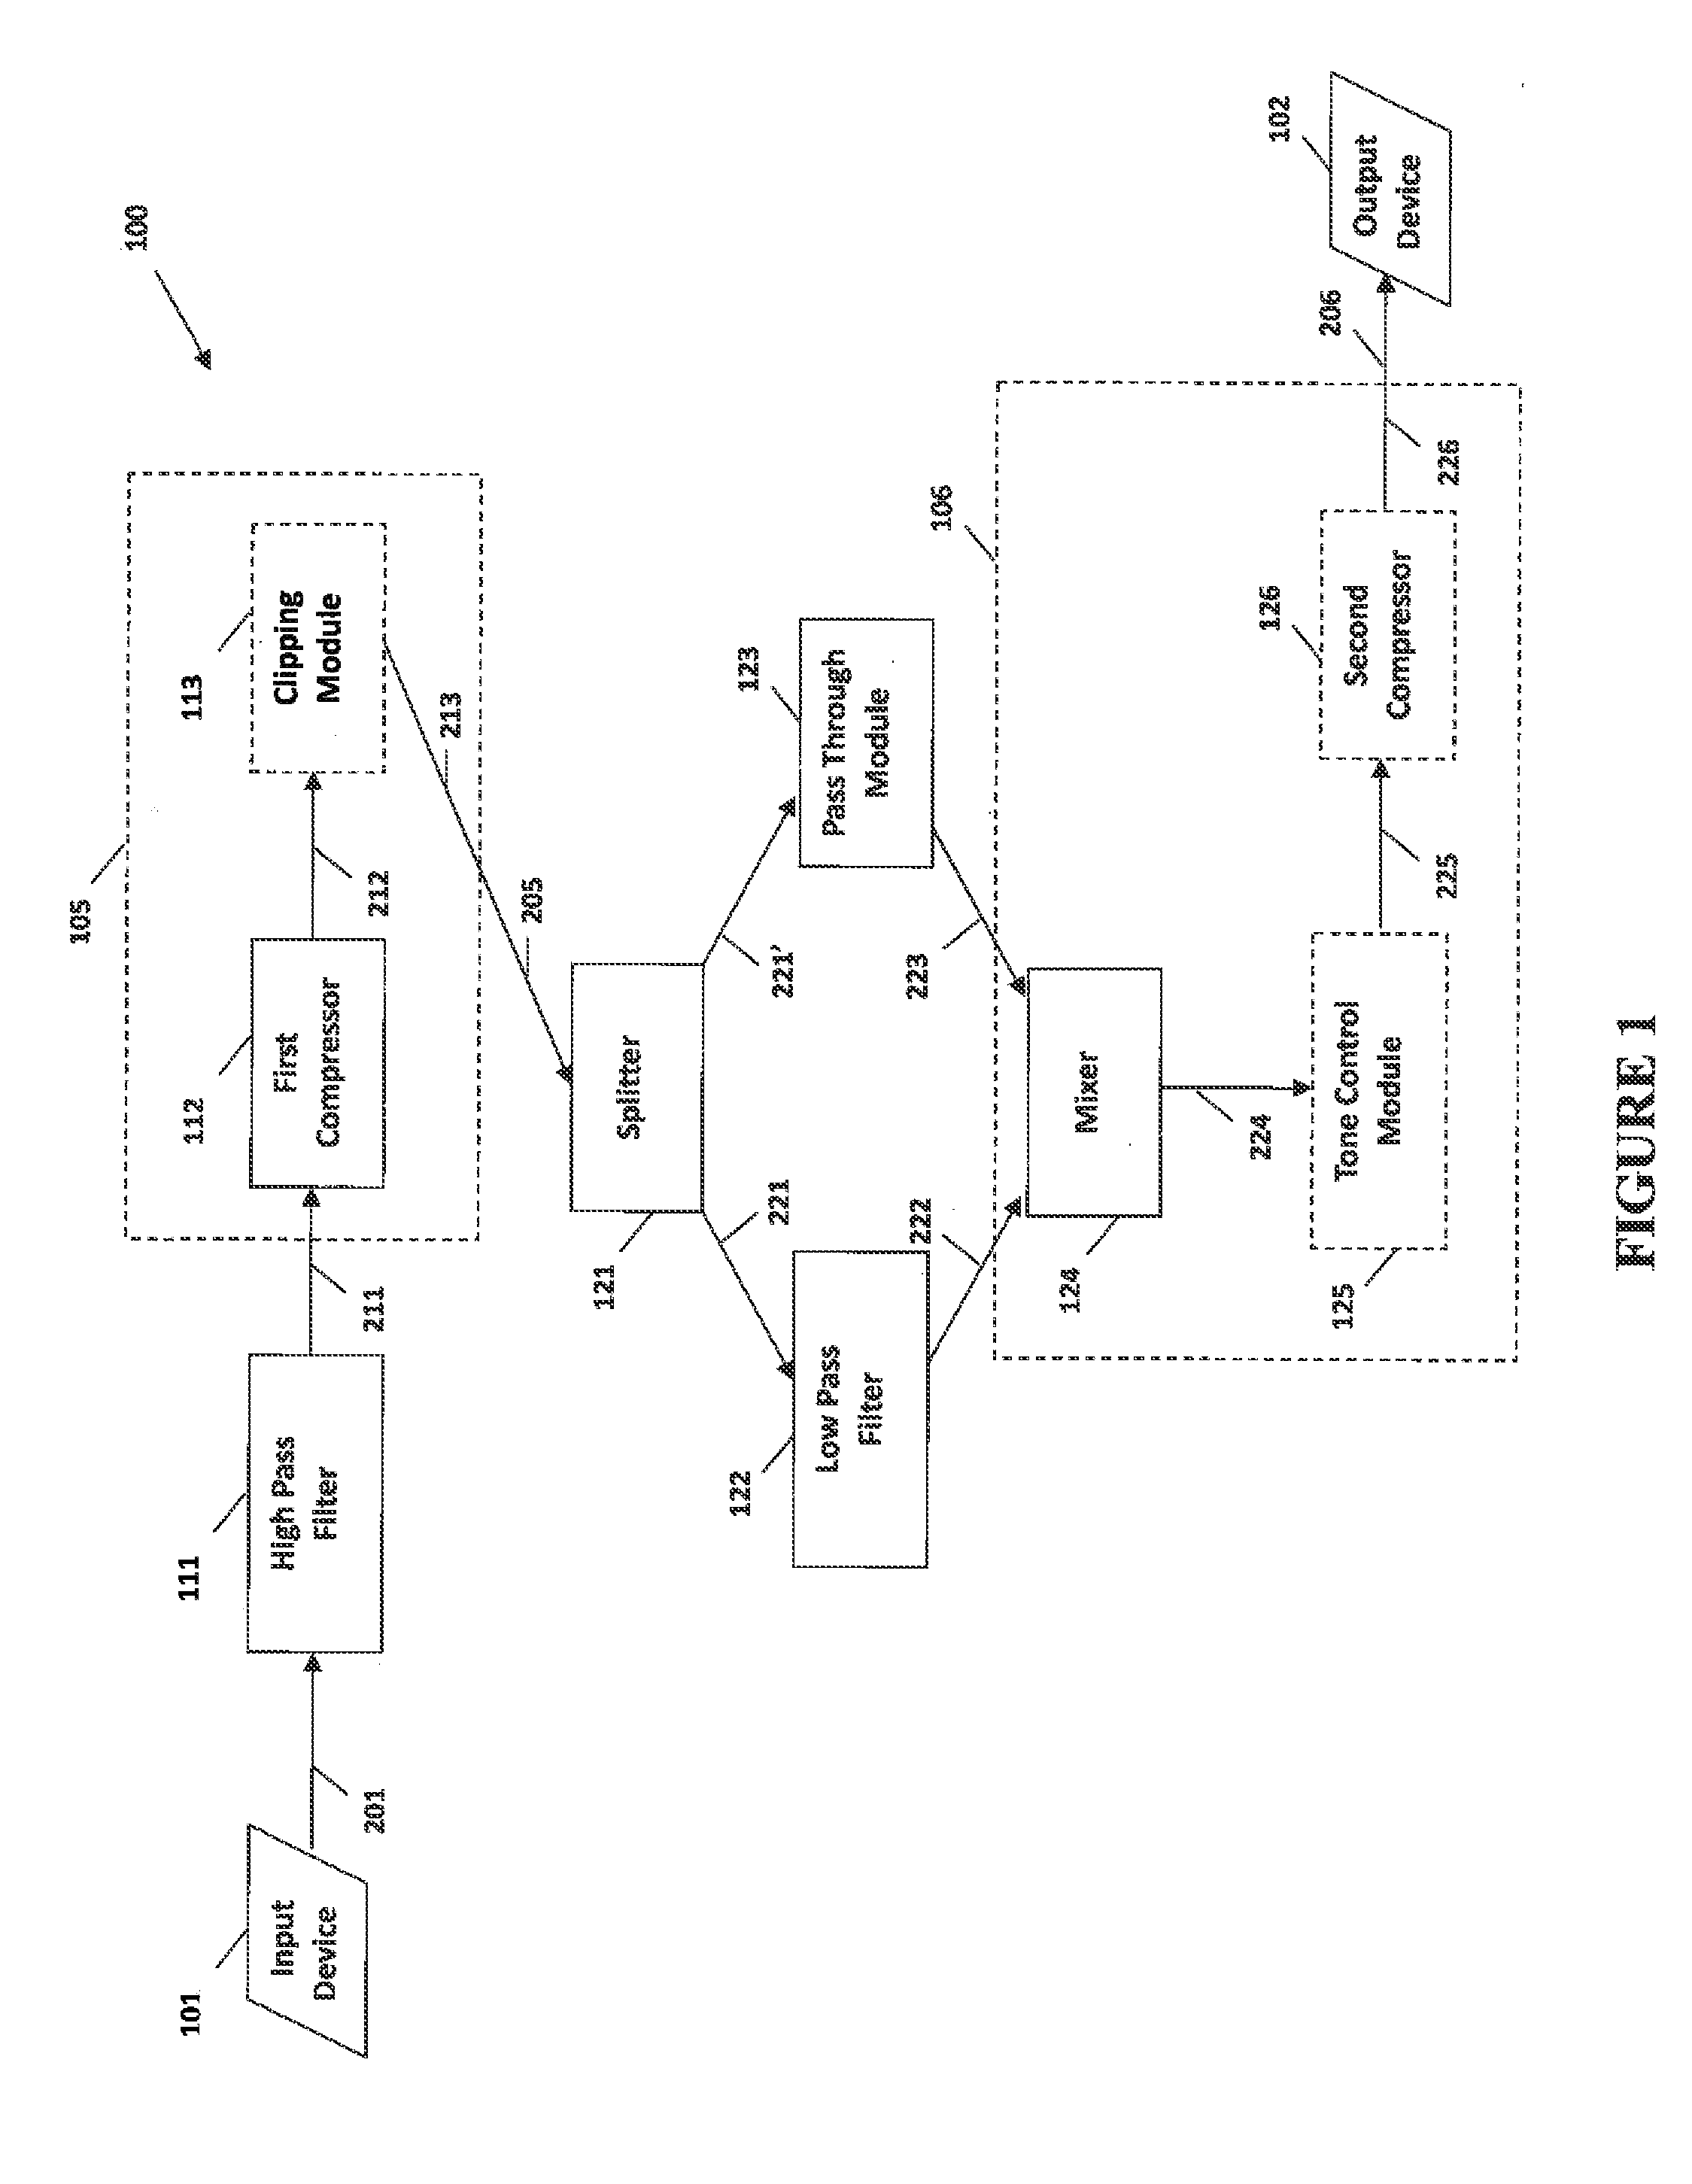 System and method for narrow bandwidth digital signal processing